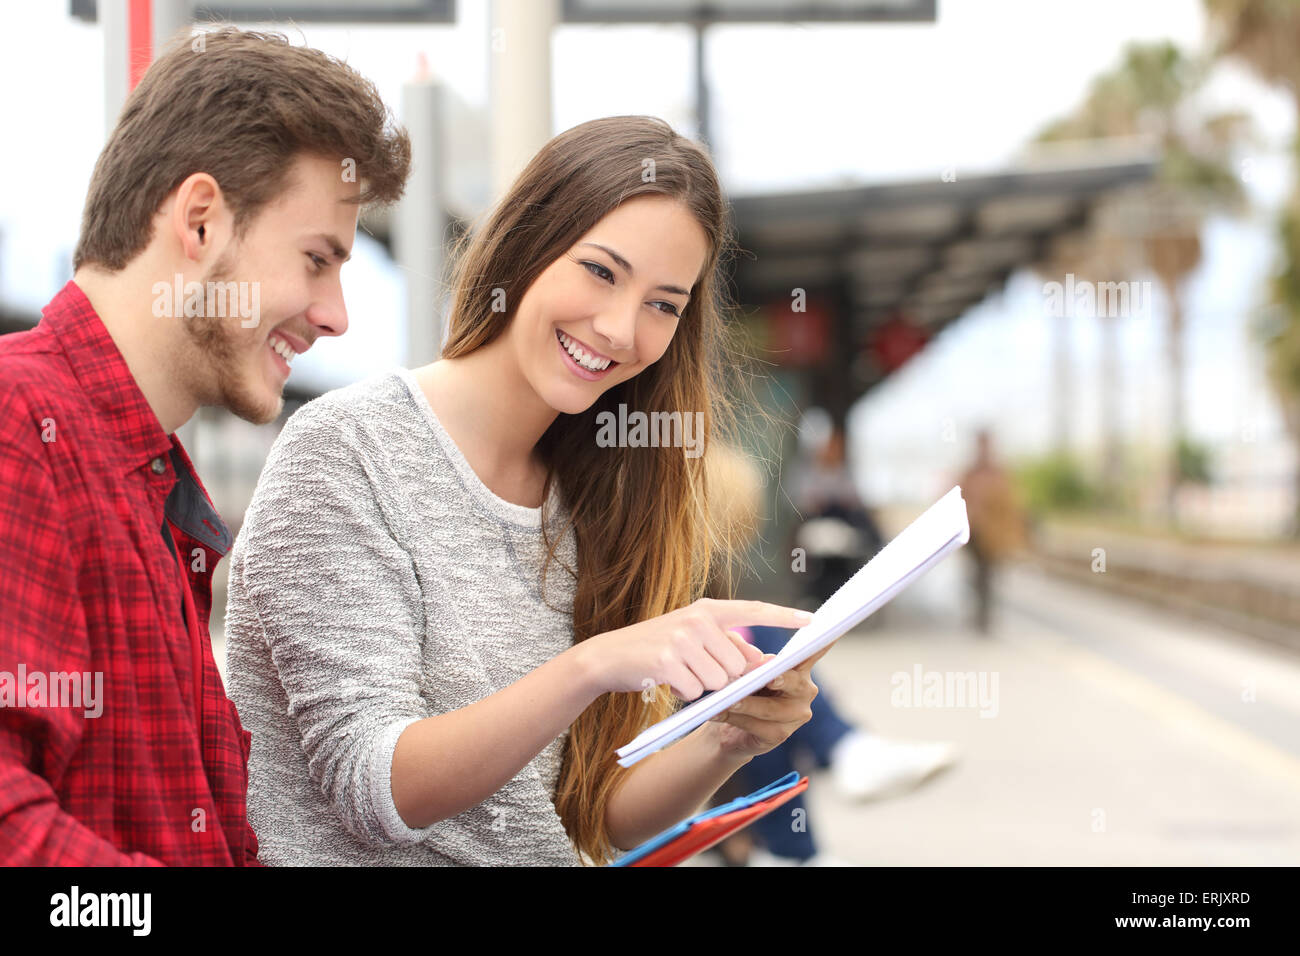 Happy couple of students studying and learning in a train station Stock Photo